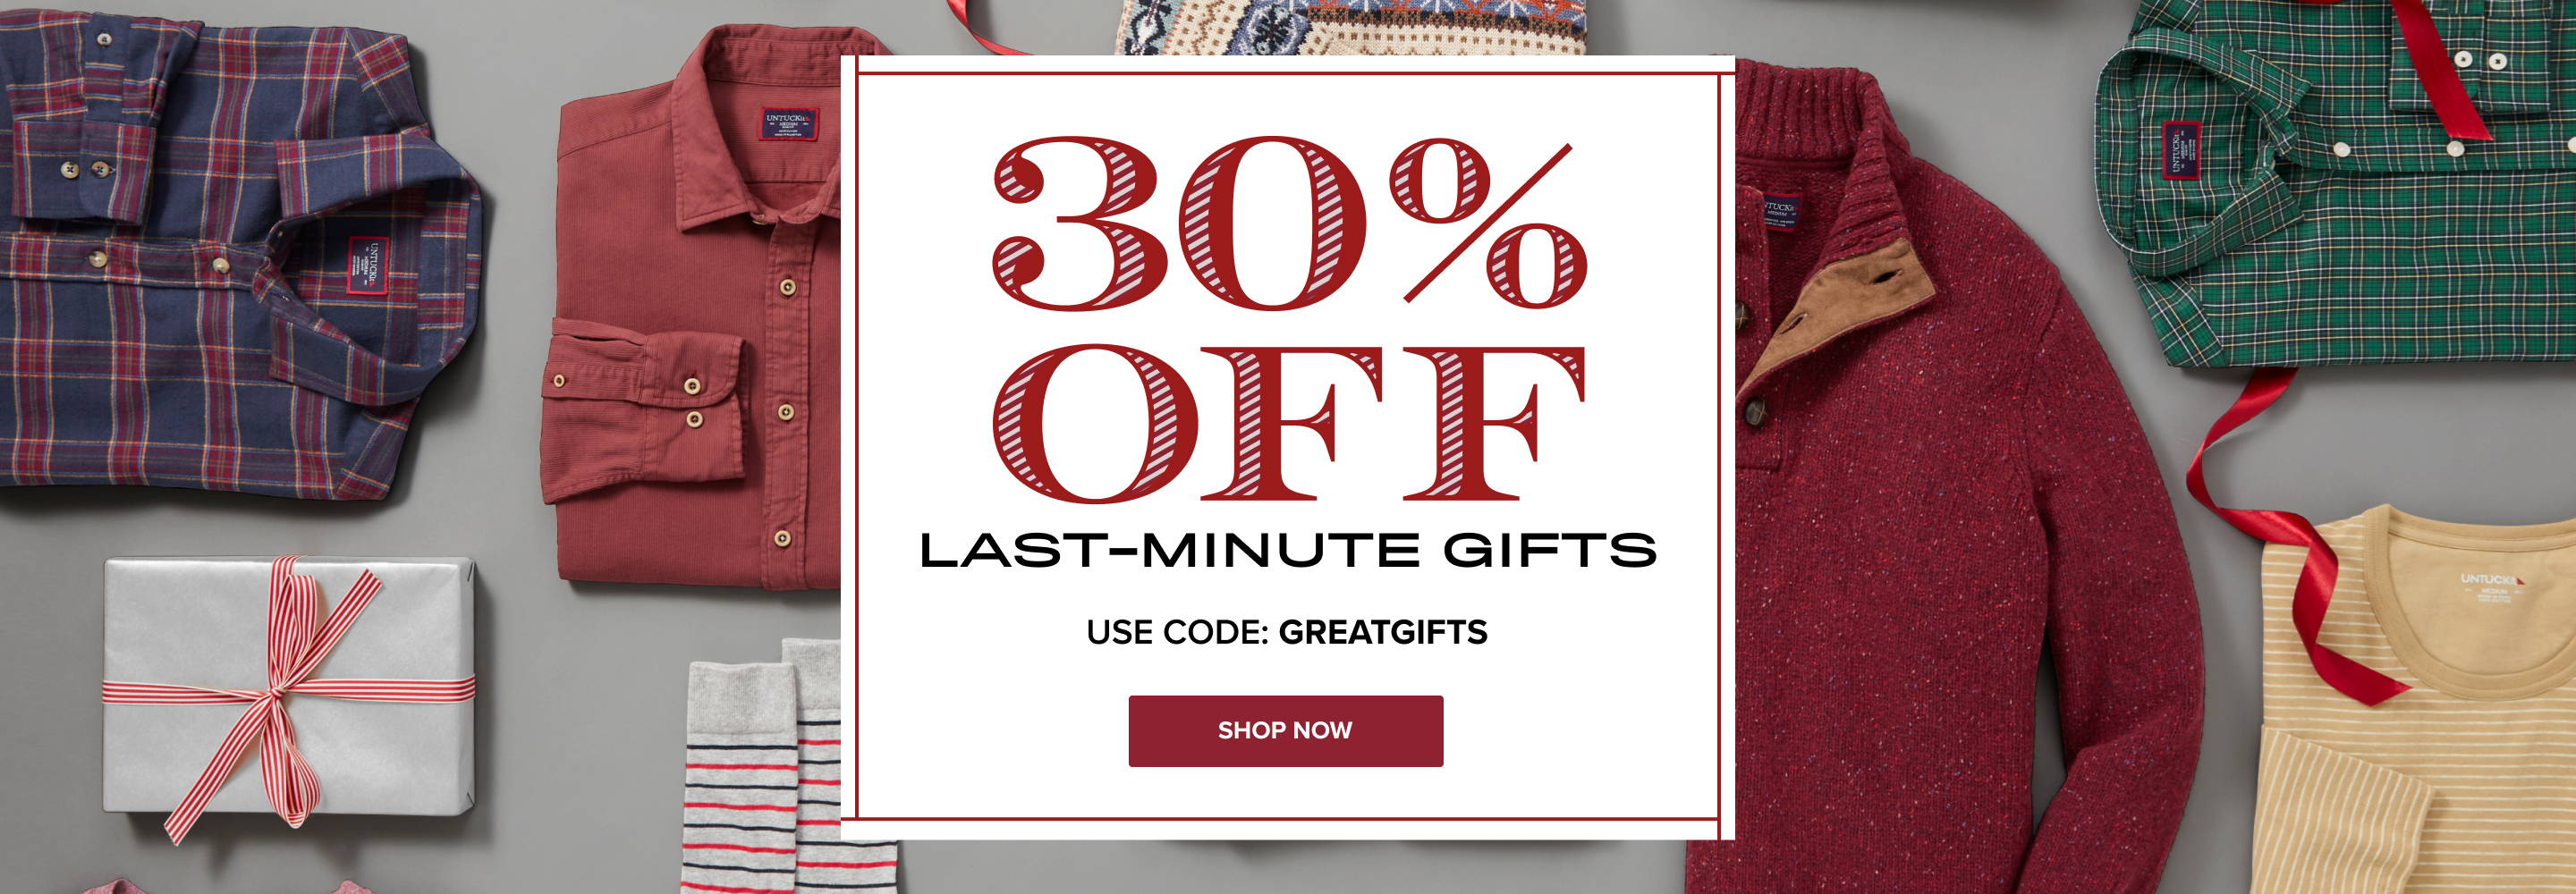 Laydown of UNTUCKit Holiday Products—30% Off Last-Minute Gifts | Use code: GREATGIFTS